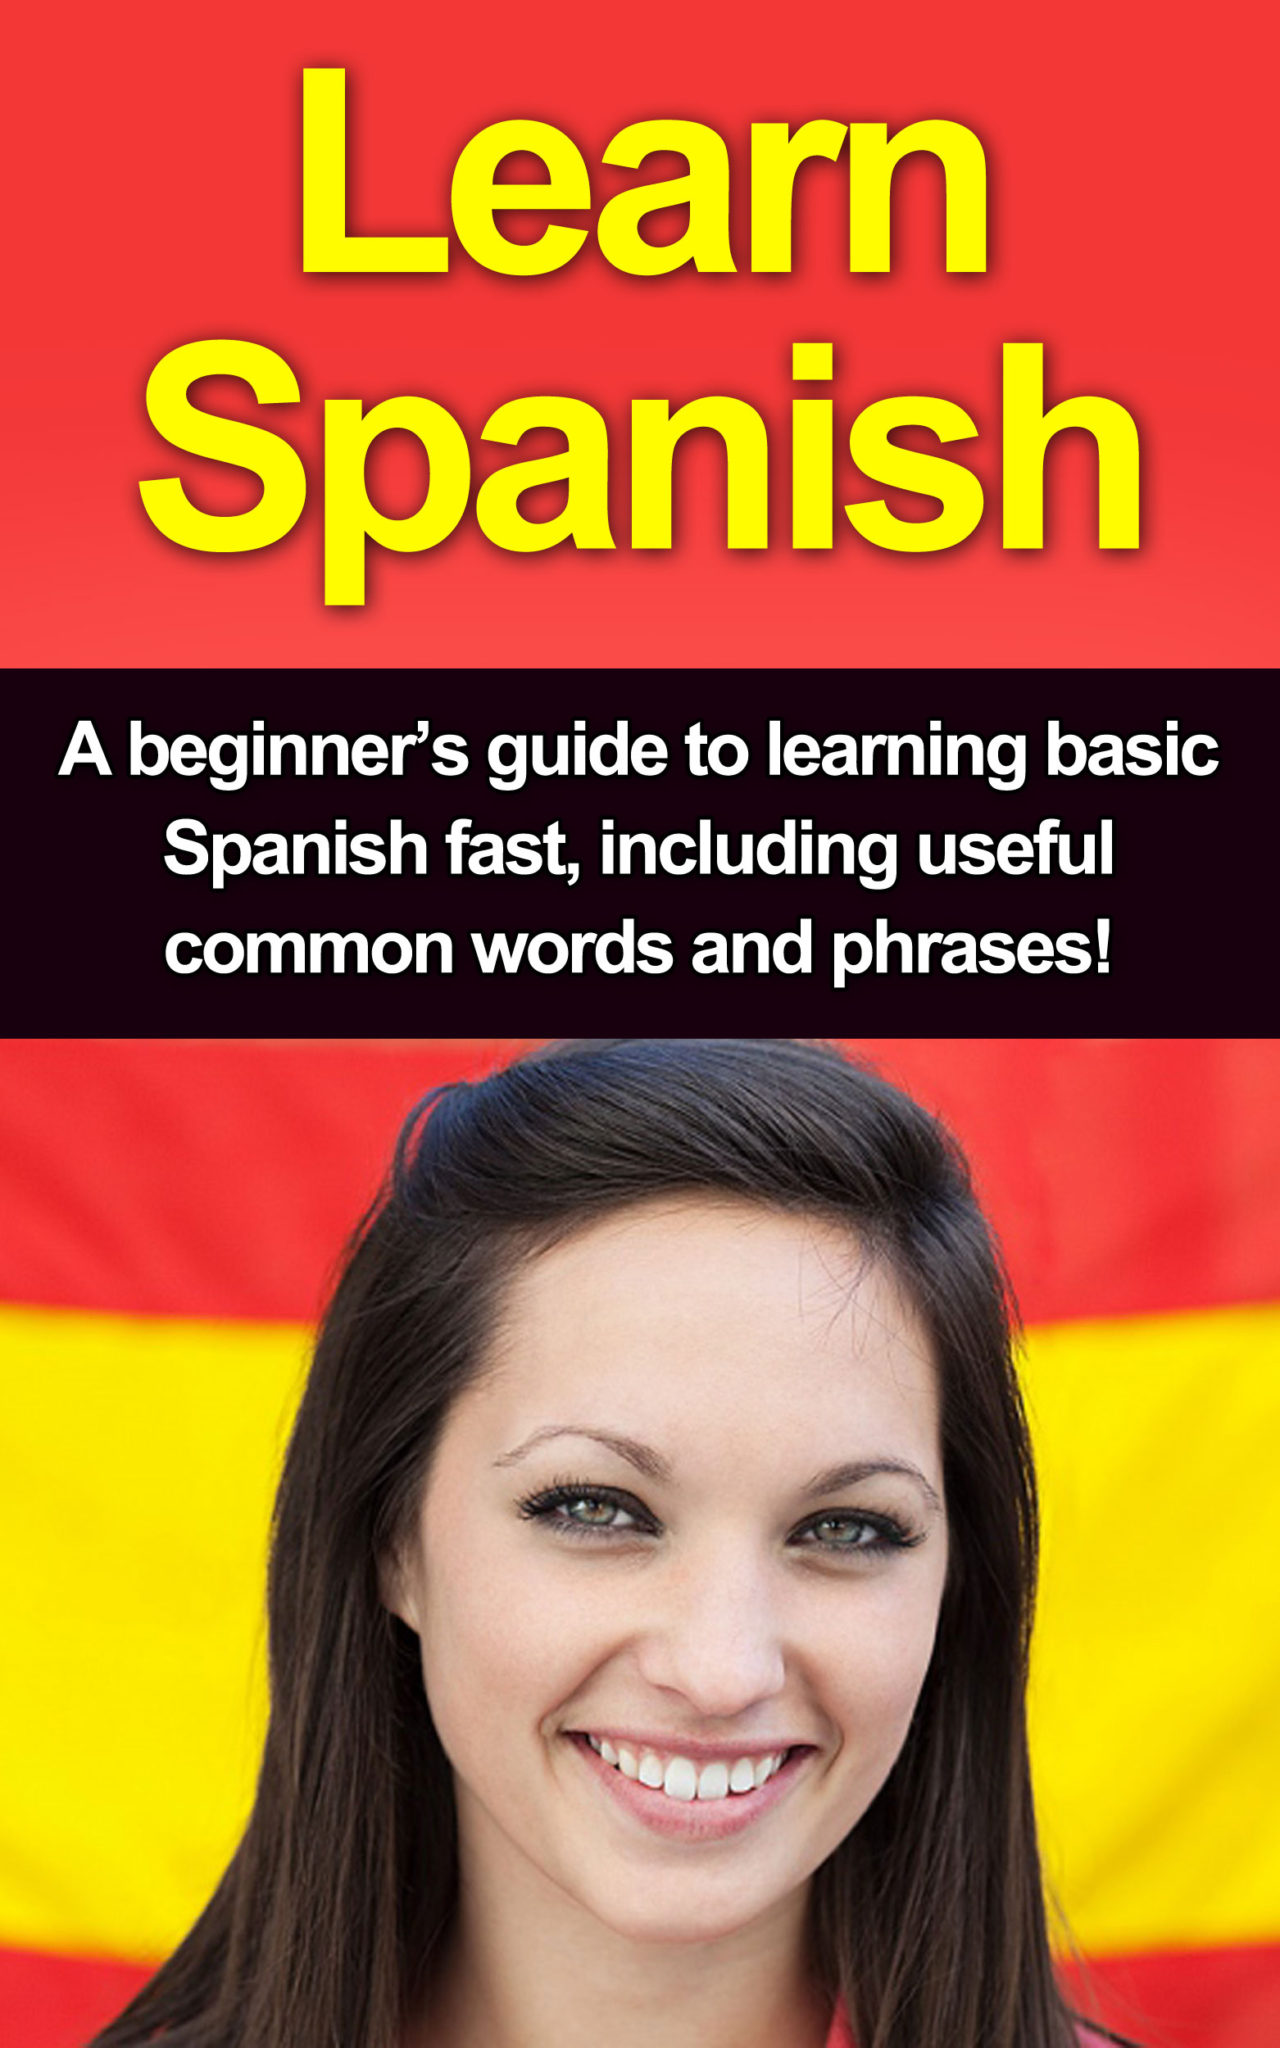 FREE: Learn Spanish: A beginner’s guide to learning basic Spanish fast, including useful common words and phrases! by Adrian Alfaro